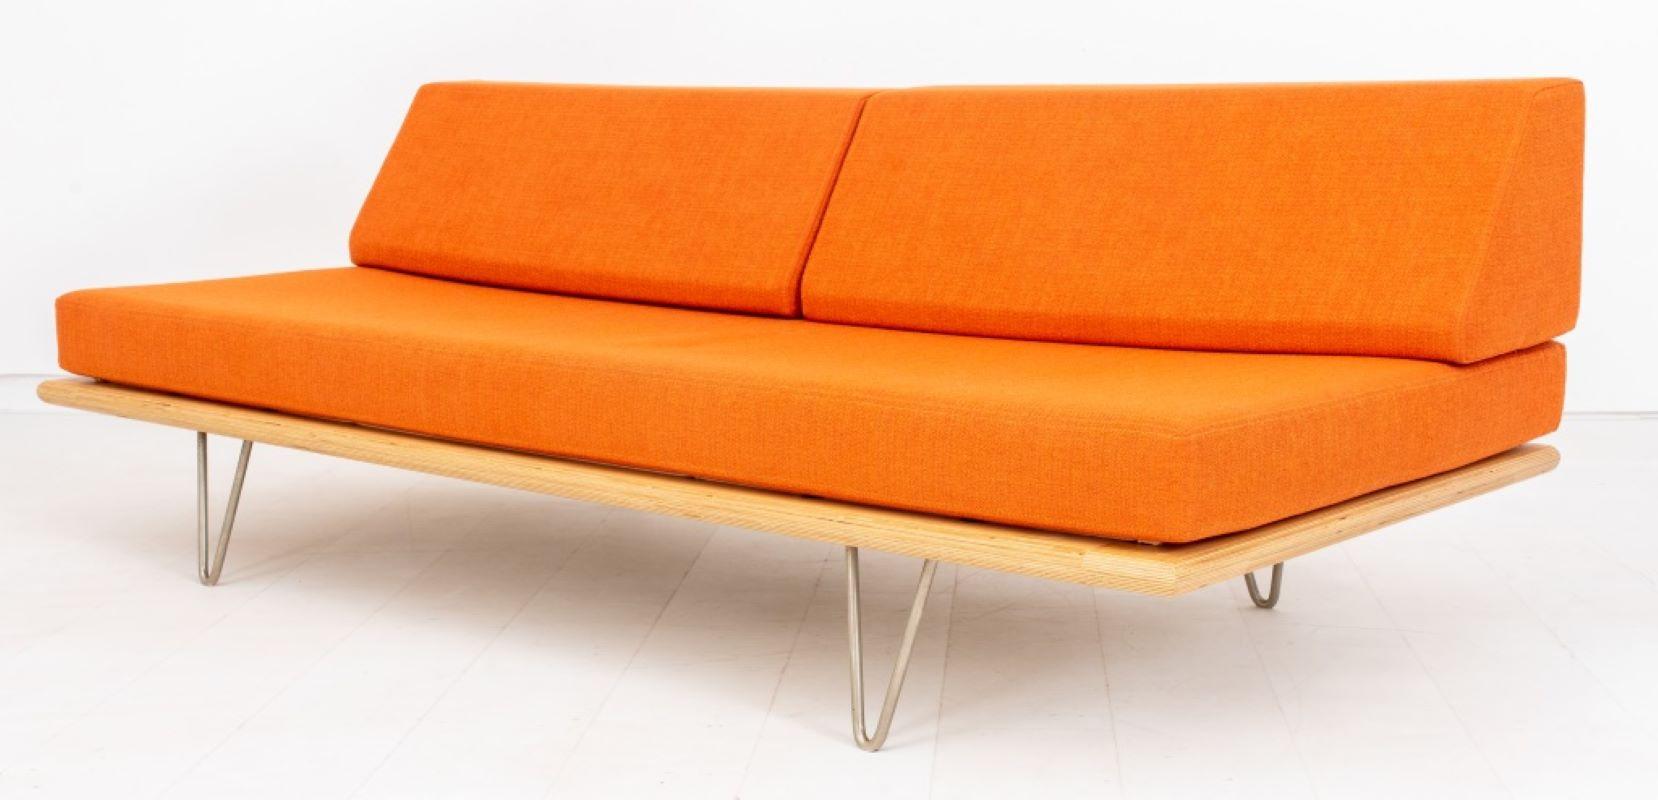 Mid-Century Modern George Nelson Case Study v Leg Daybed